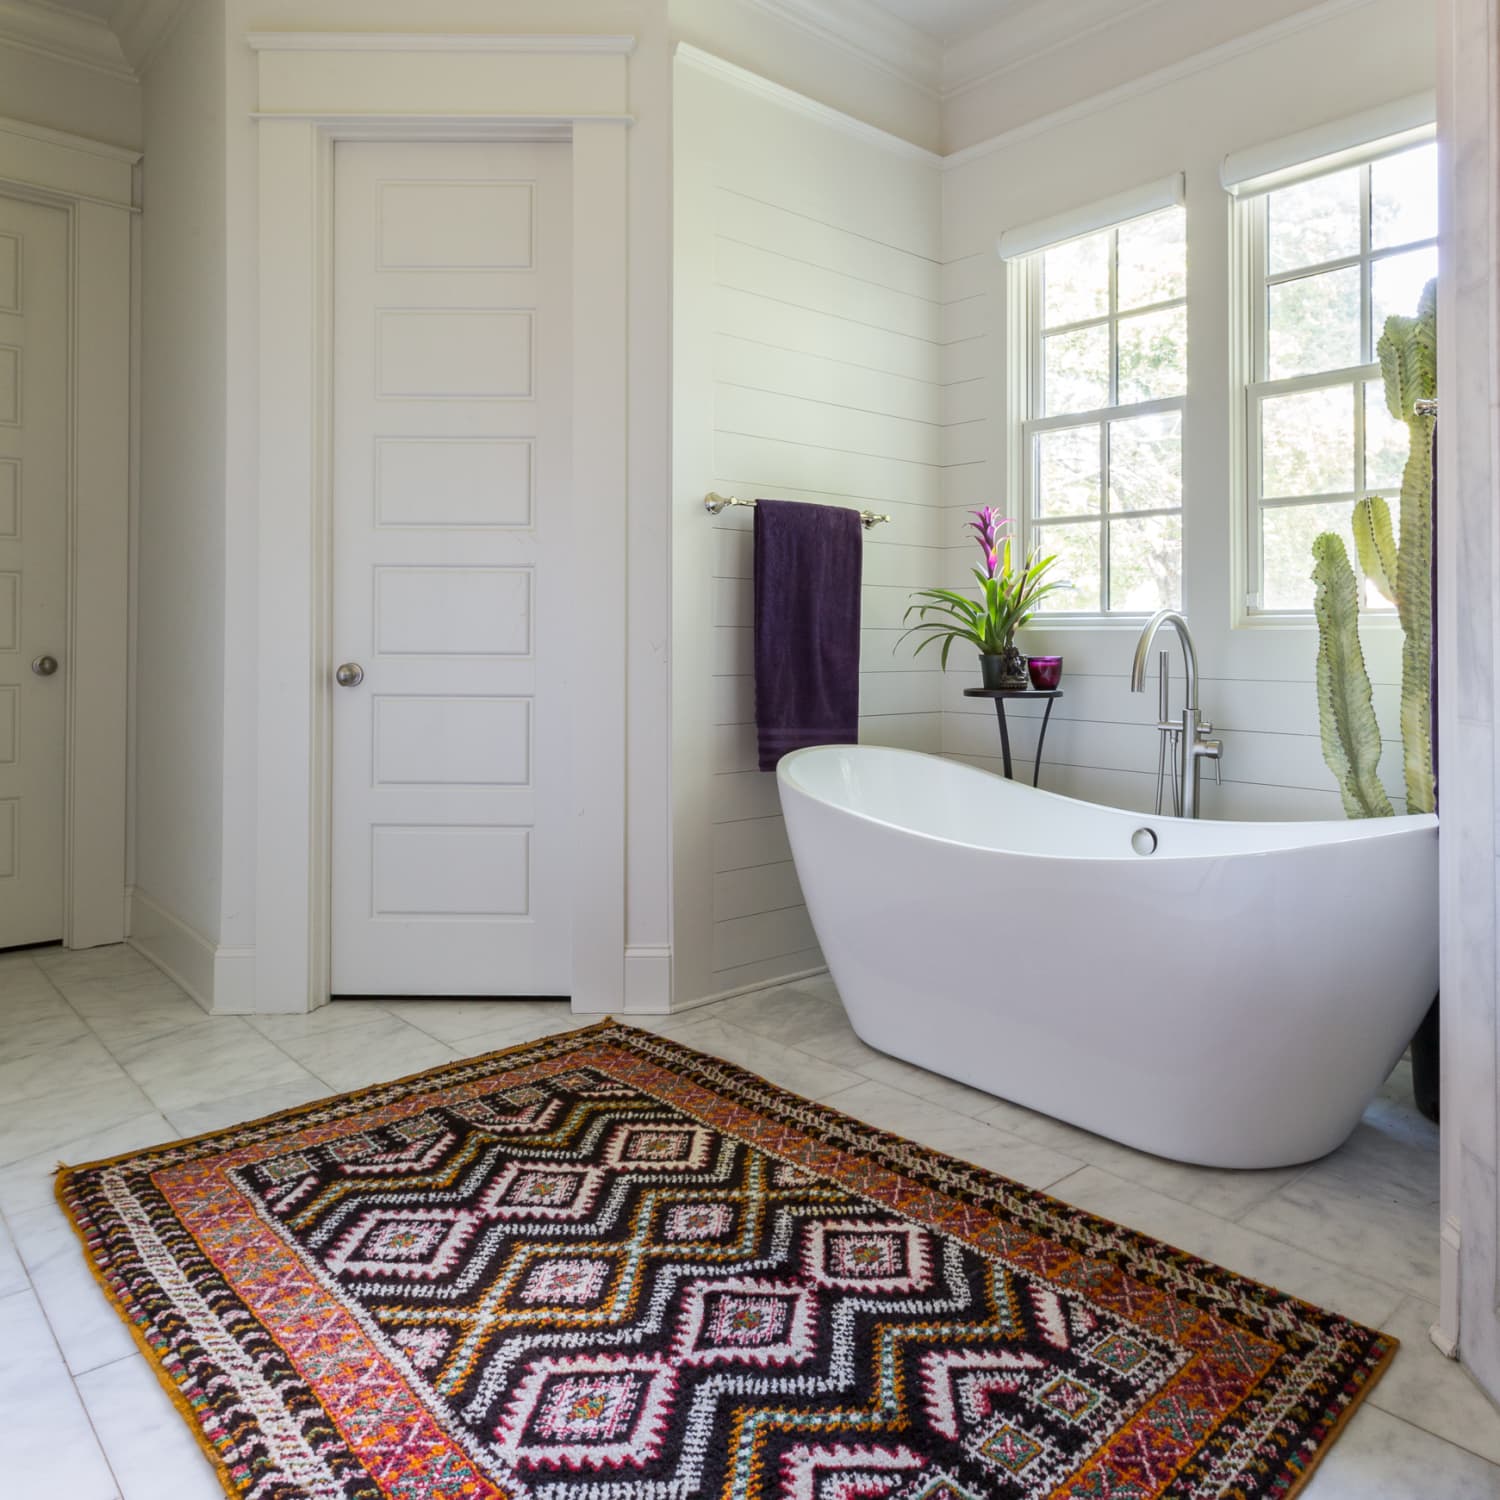 How To Place Bathroom Rugs